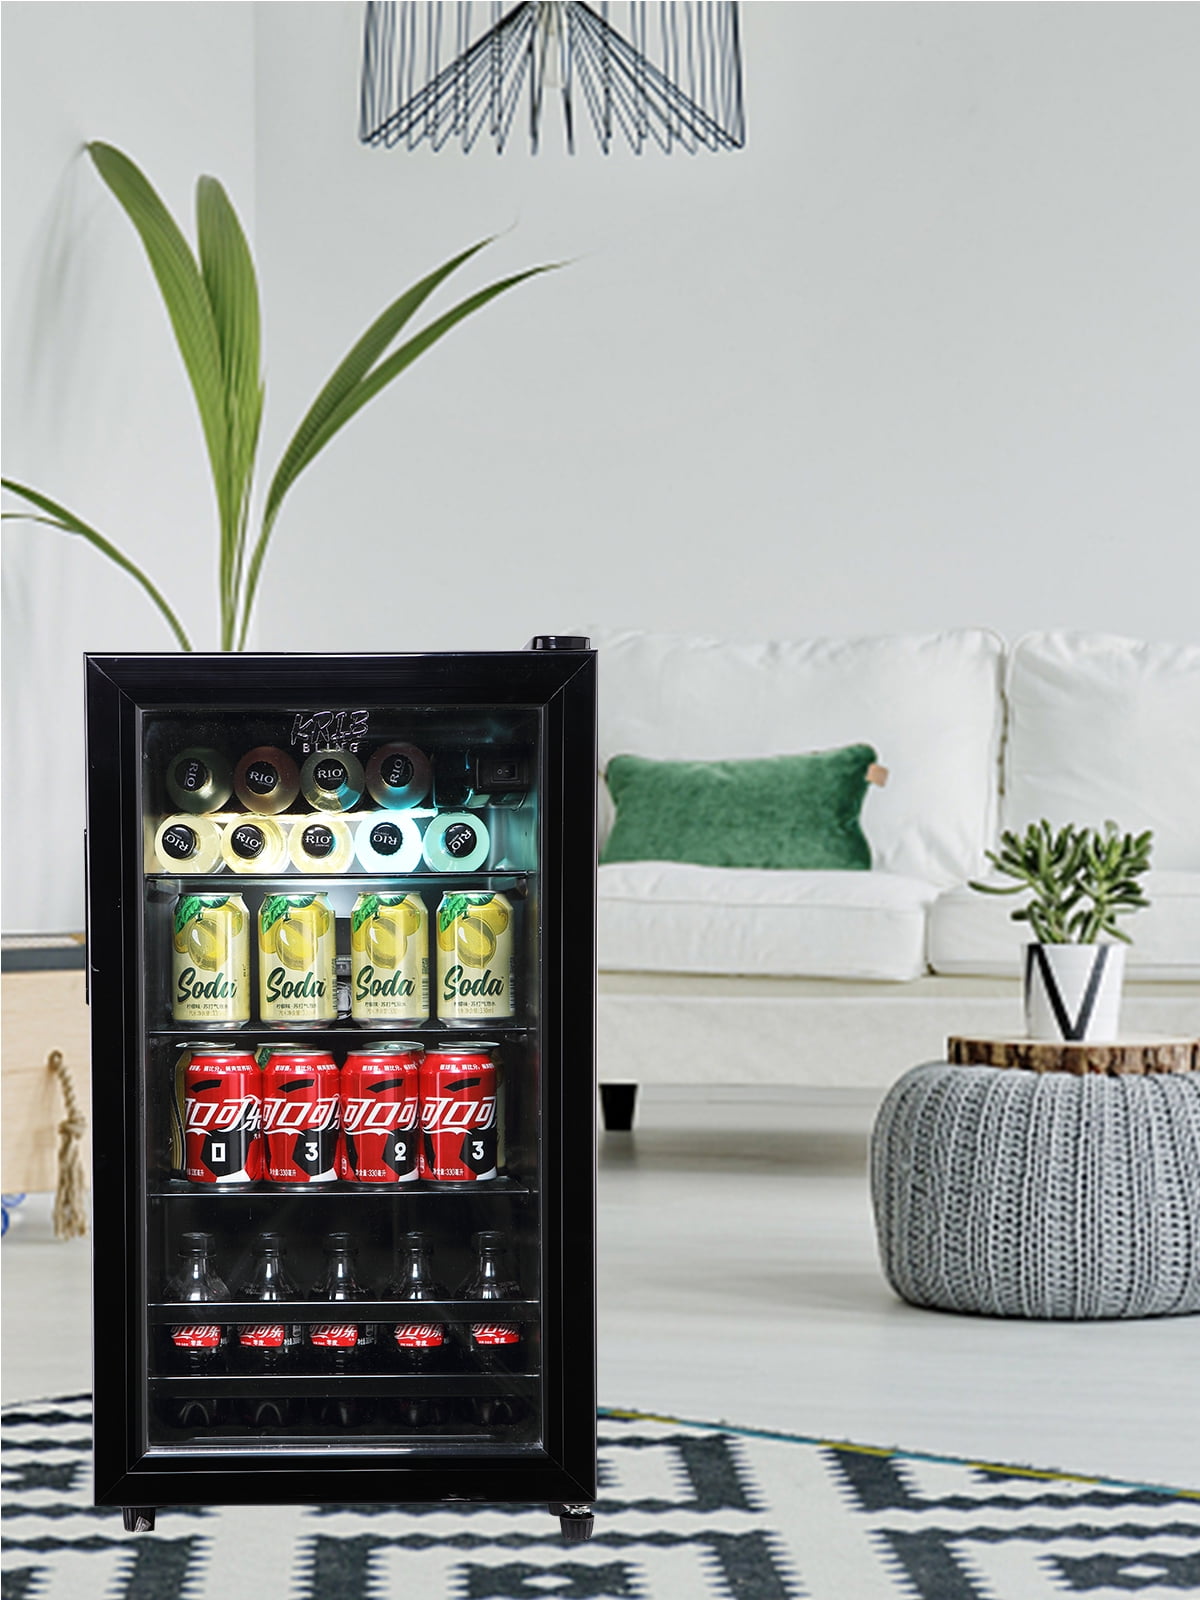  Kndko Beverage Refrigerator Cooler - Mini Fridge Soda or Beer,  Small Wine or Champagne Cooler for Home and Bar,Small Drink  Dispenser,Electronic temperature control,3.1Cu.Ft,Black : Appliances